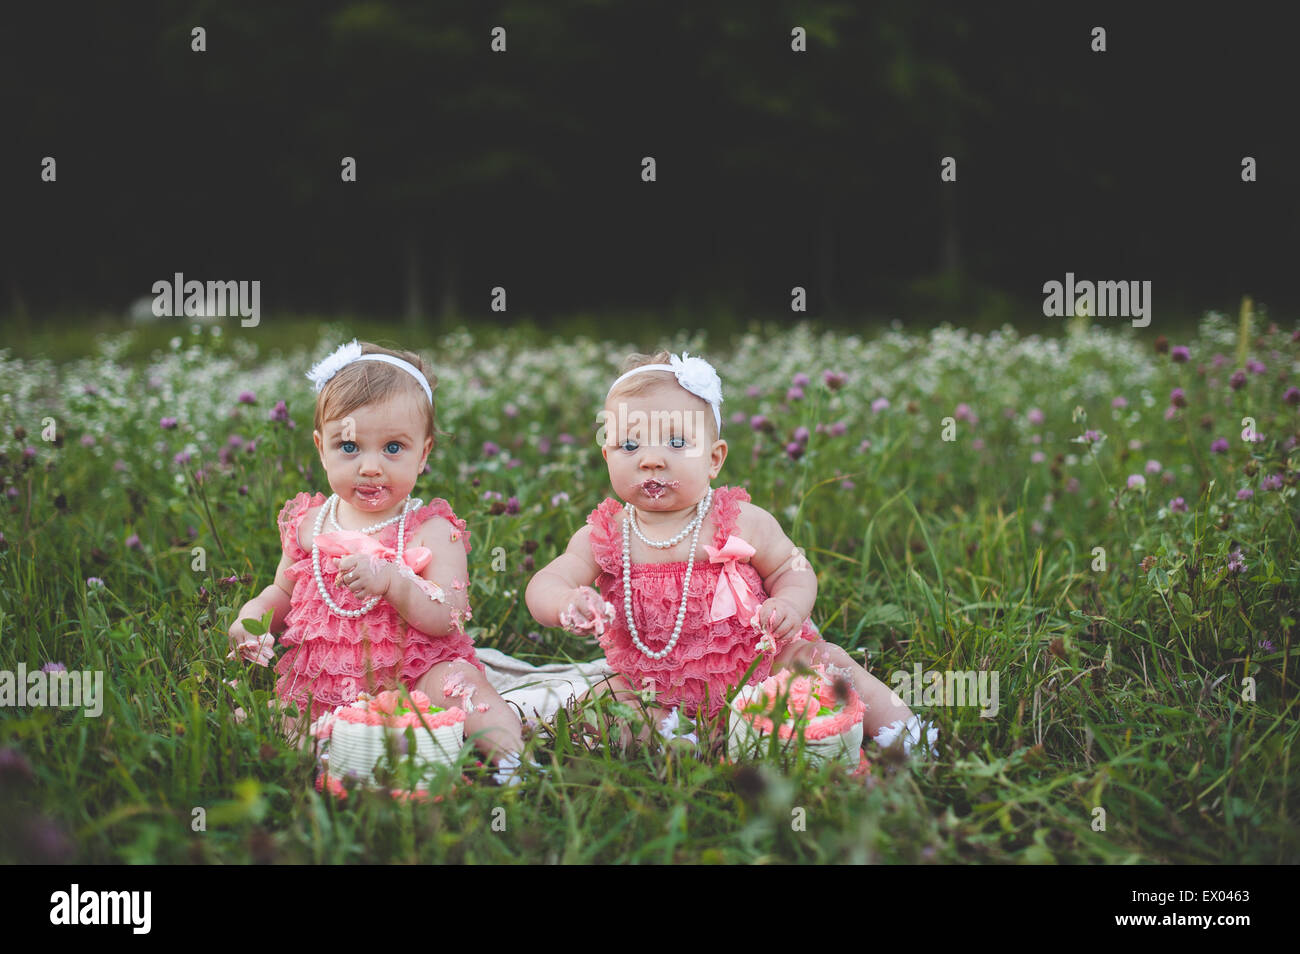 Portrait of baby twin sisters sitting in wildflower meadow eating cake Banque D'Images